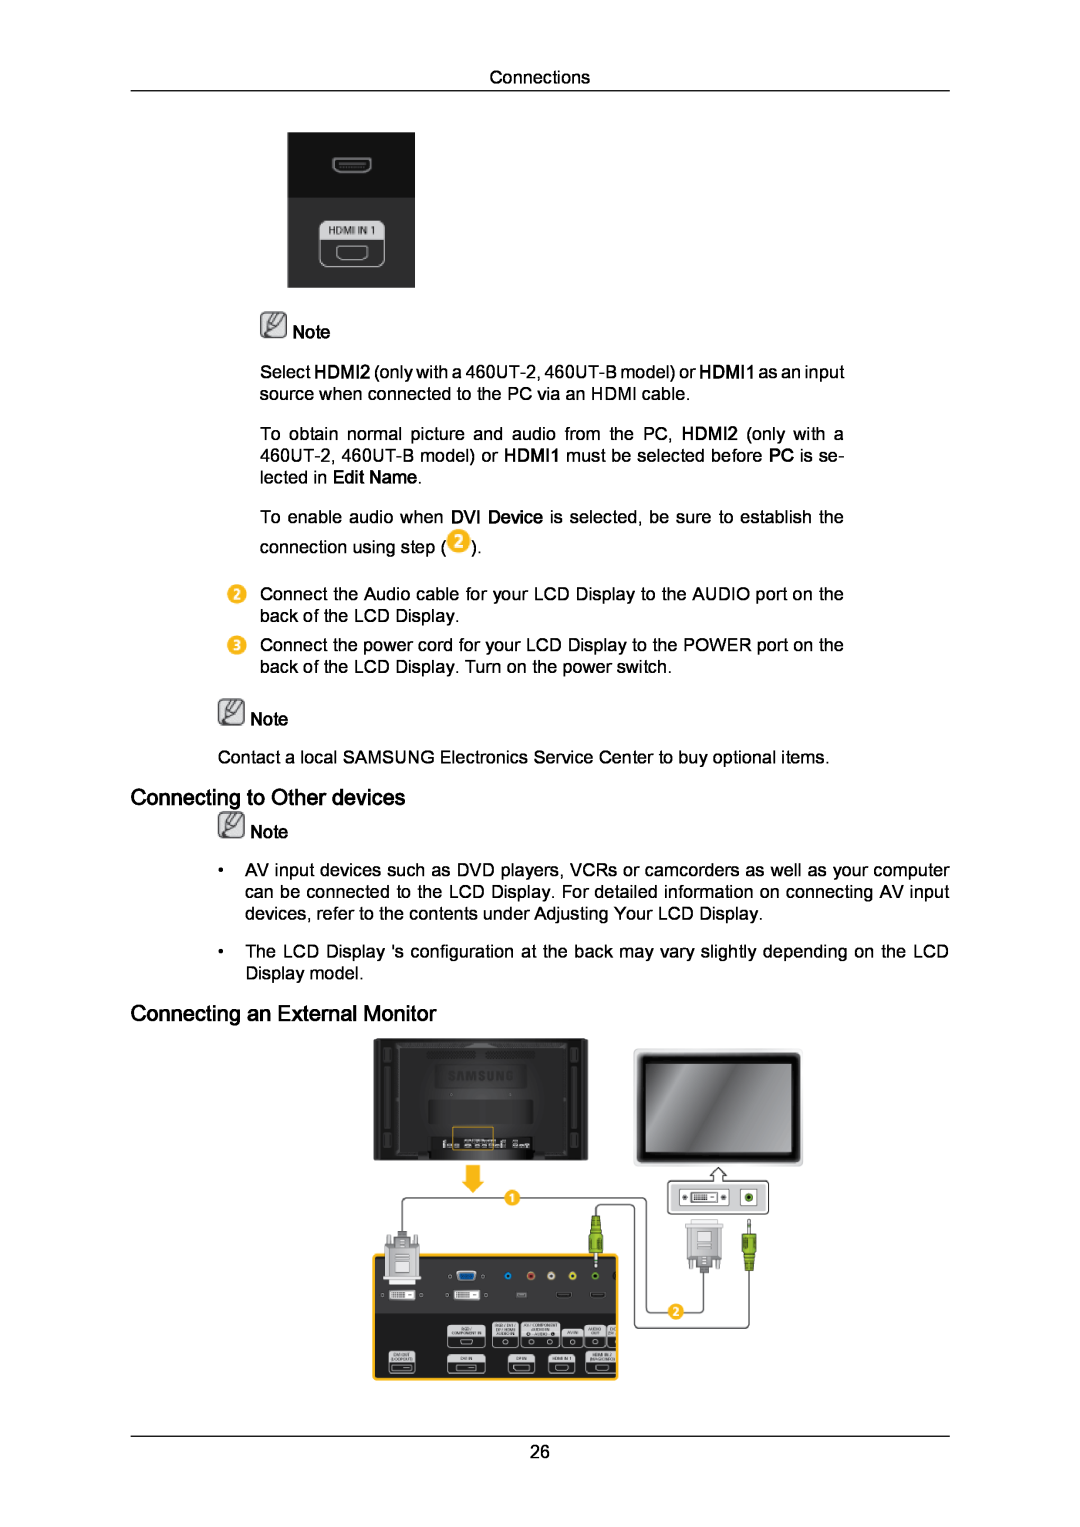 Samsung 460UT-2, 460UTN-B, 460UTN-2, 460UT-B user manual Connecting to Other devices, Connecting an External Monitor 